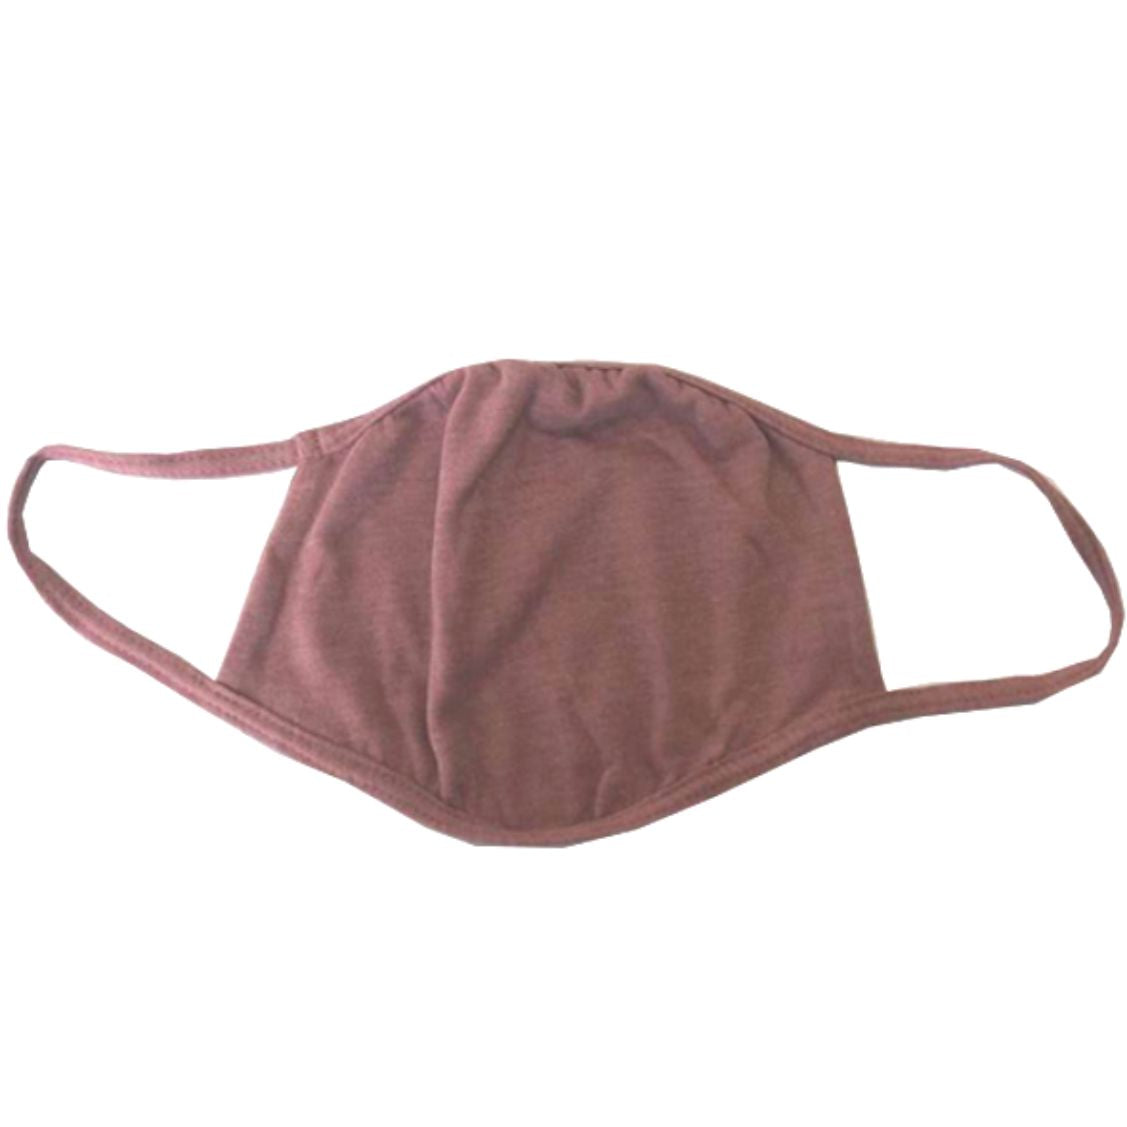 Face Mask Bella + Canvas - Youth -  Heather Mauve SALE While Supplies Last